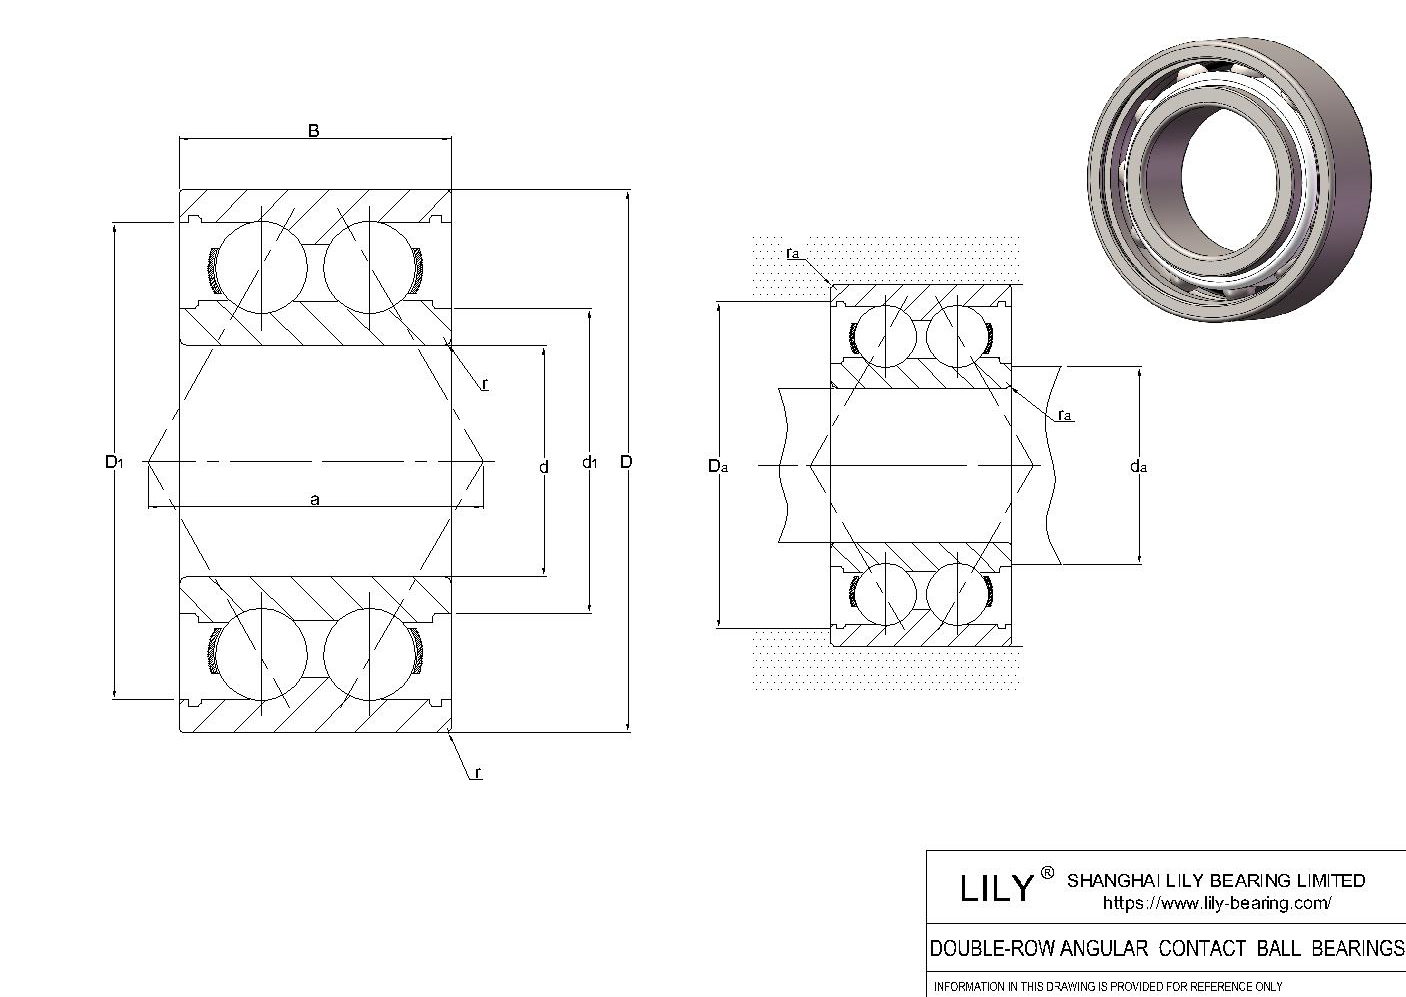 SS3206 2RS Stainless Steel Double Row Angular Contact Ball Bearings cad drawing